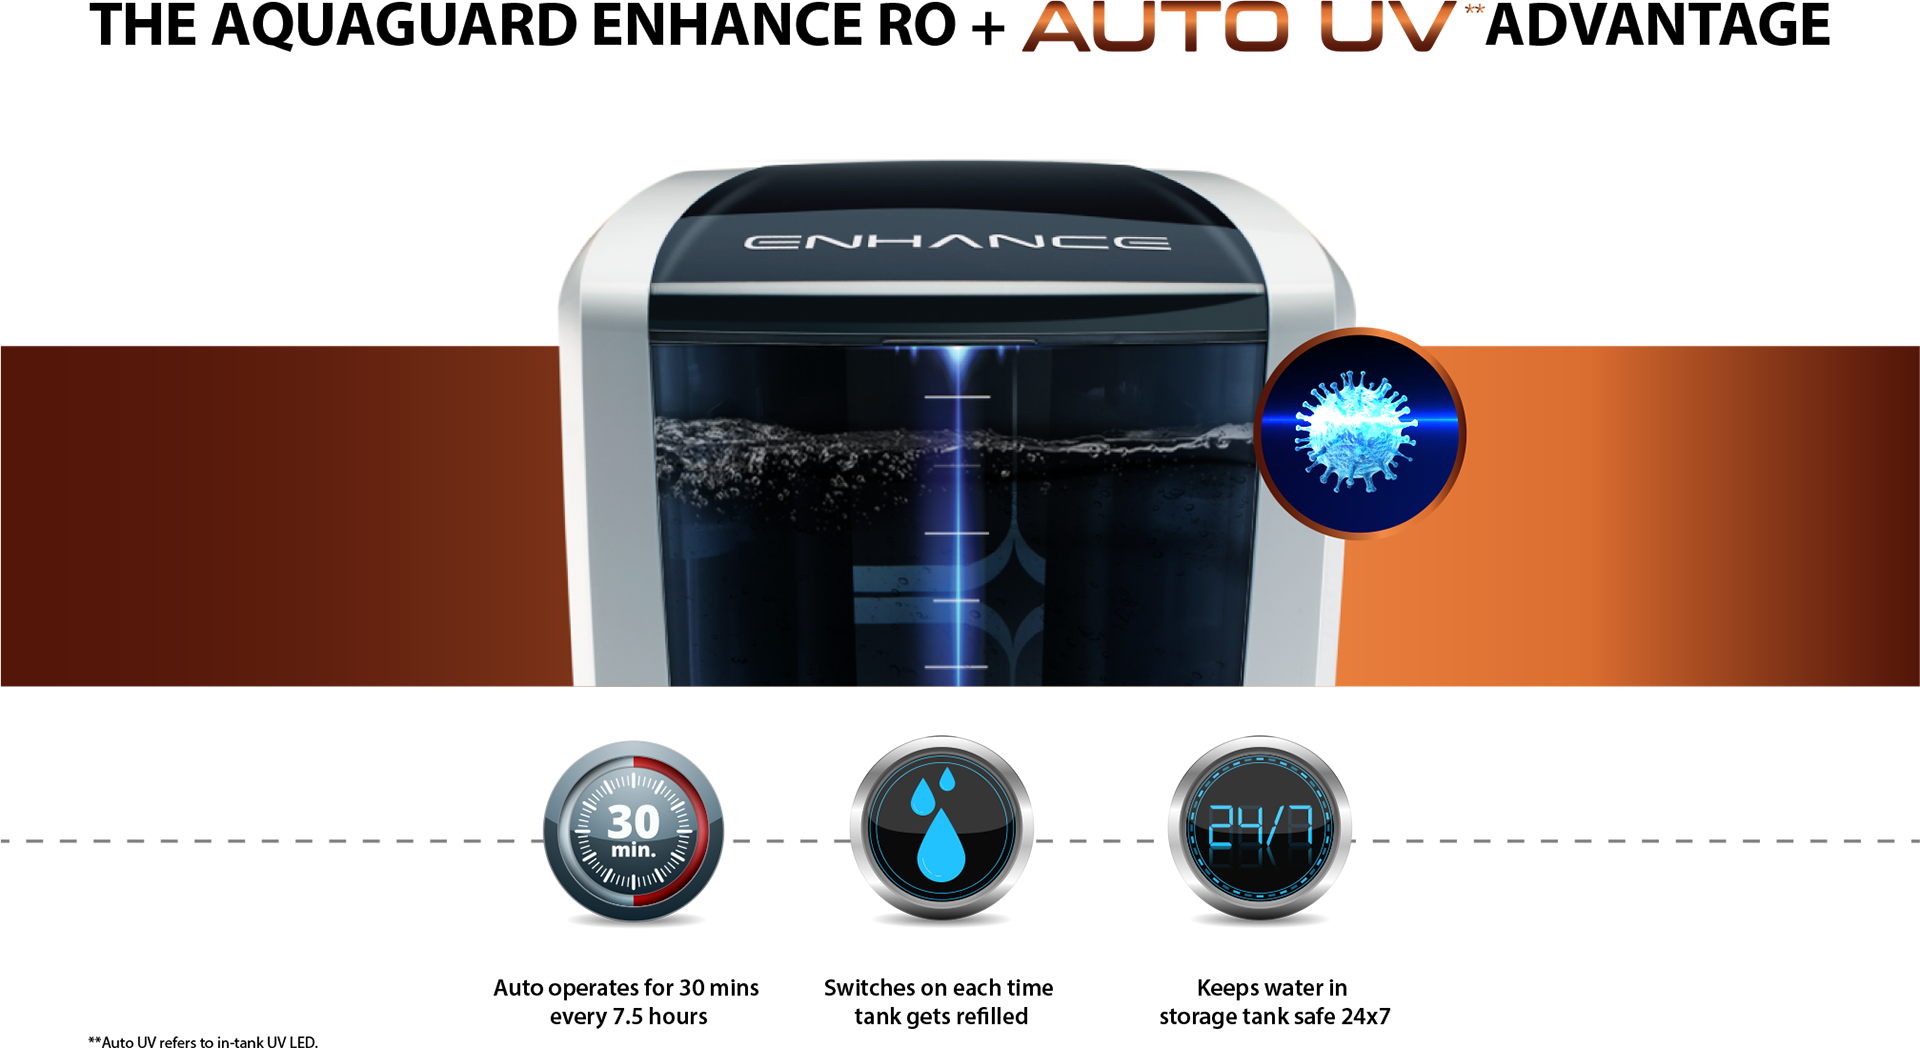 Auto operates for 30 mins every 7.5 hours Switches on each time tank gets refilled Keeps water in storage tank safe 24x7 **Auto UV refers to in-tank UV LED.